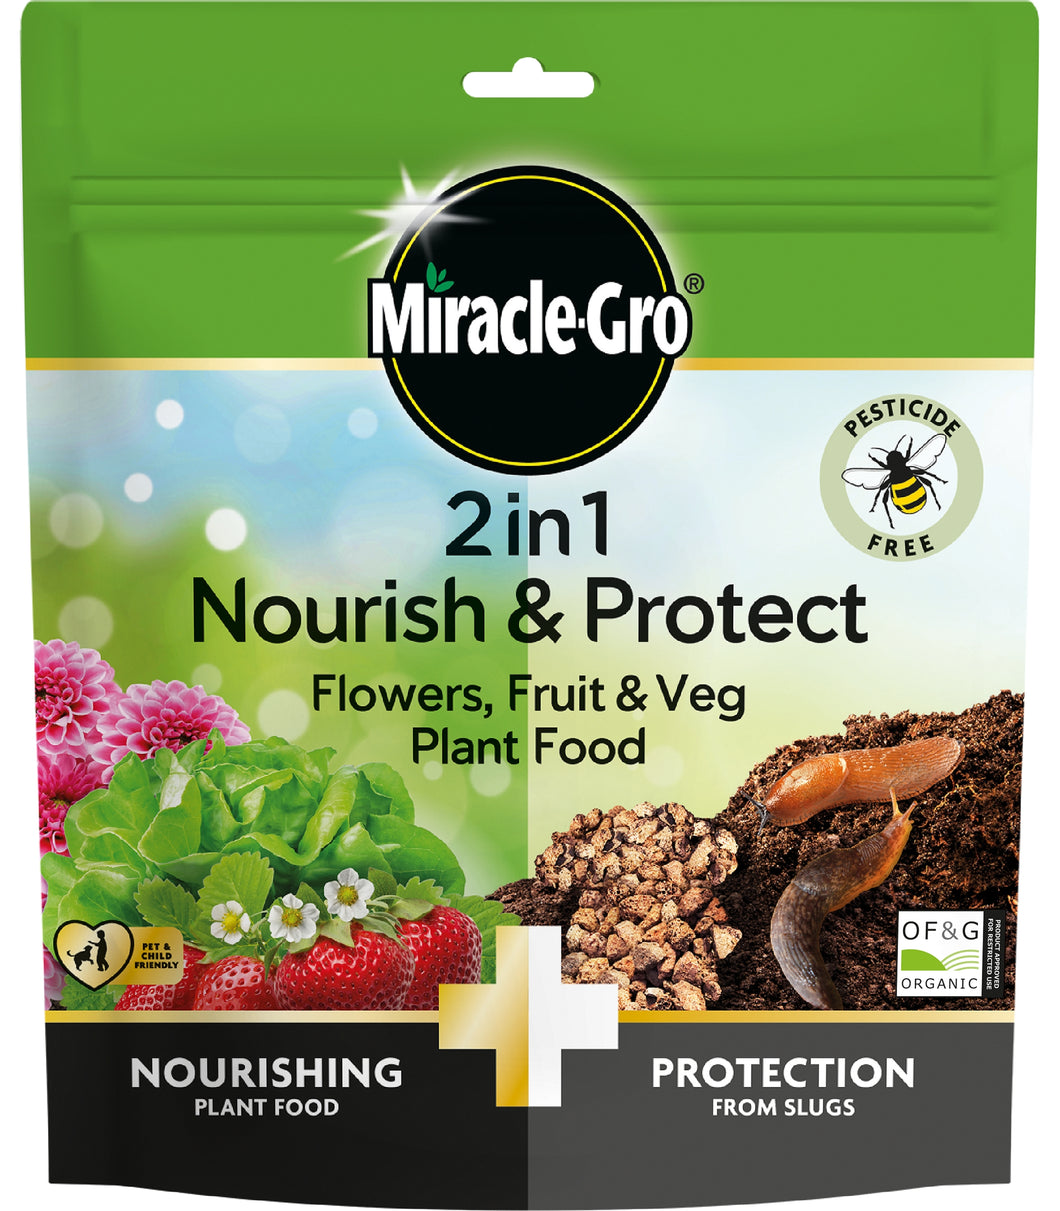 MIRACLE-GRO® 2 IN 1 NOURISH & PROTECT FLOWERS, FRUIT & VEG PLANT FOOD